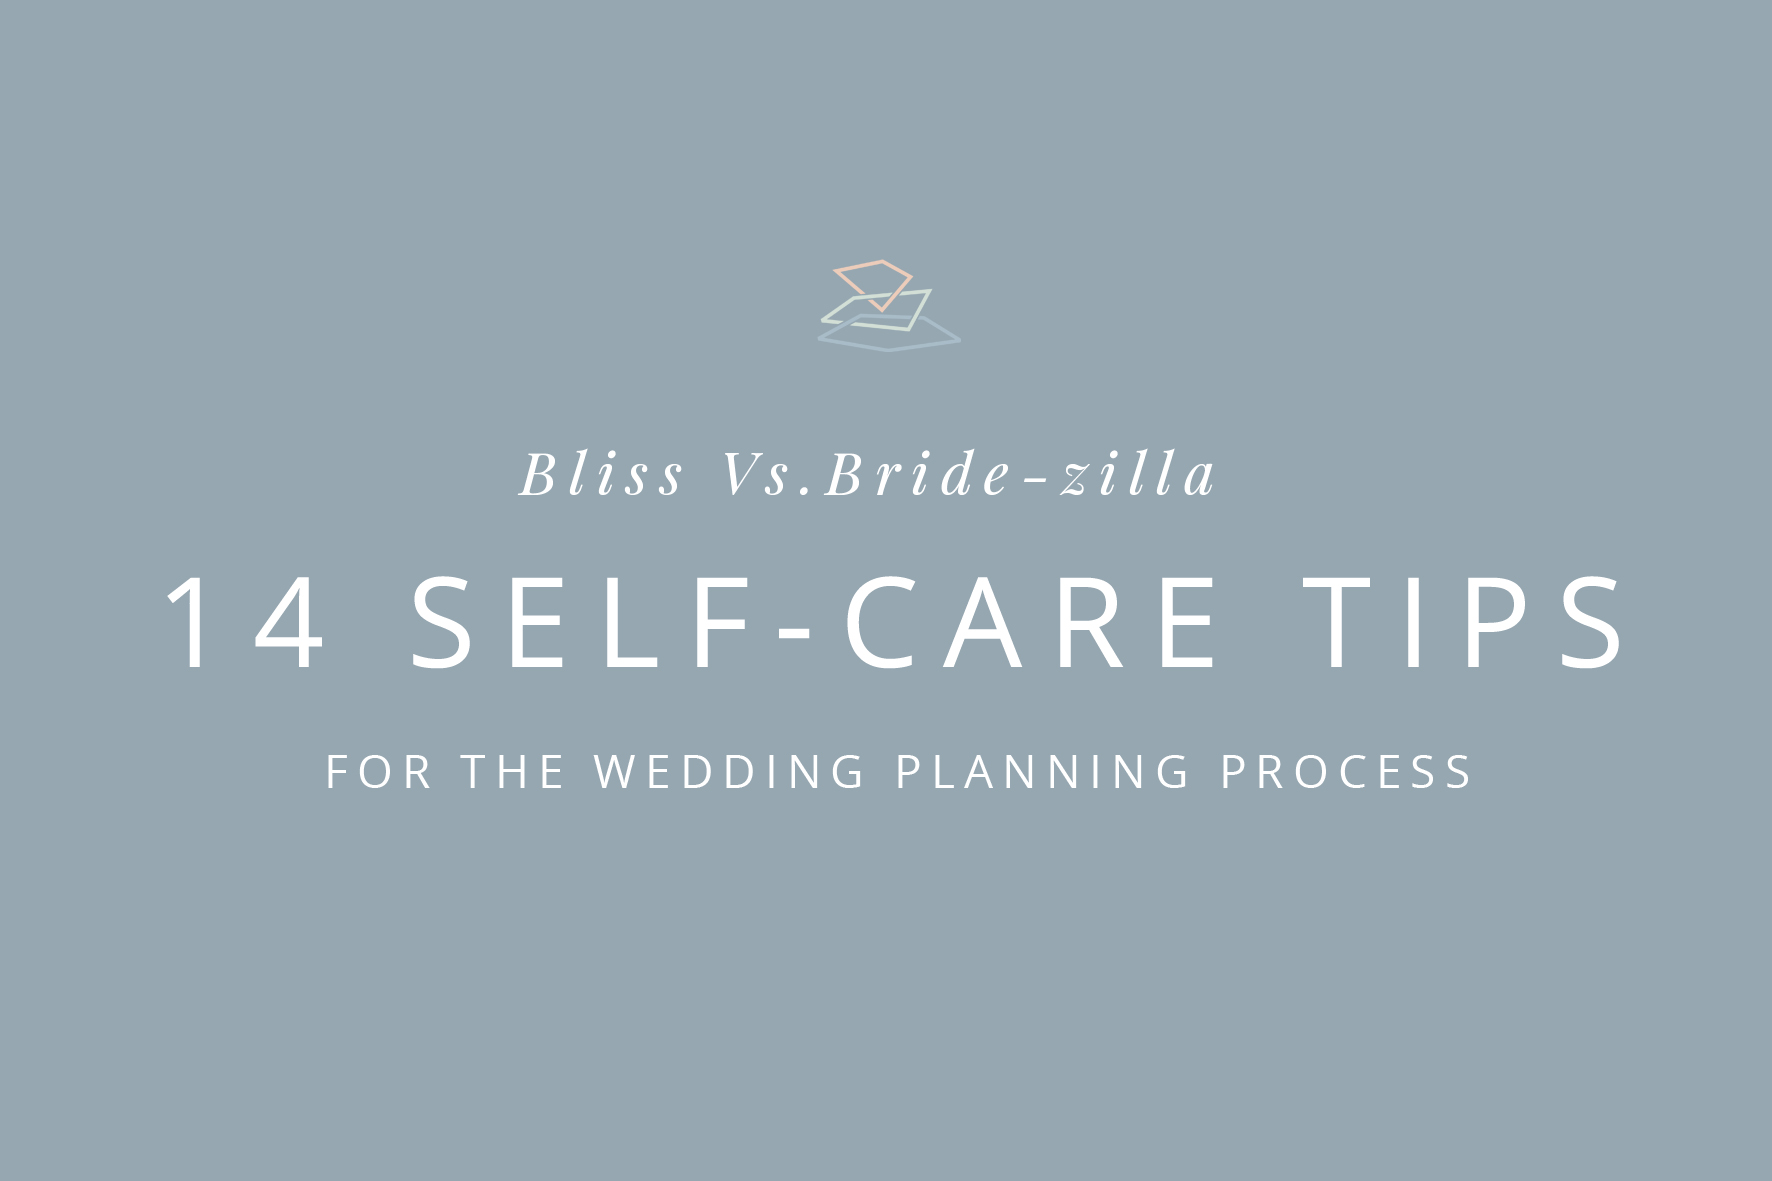 14 self care tips for wedding planning